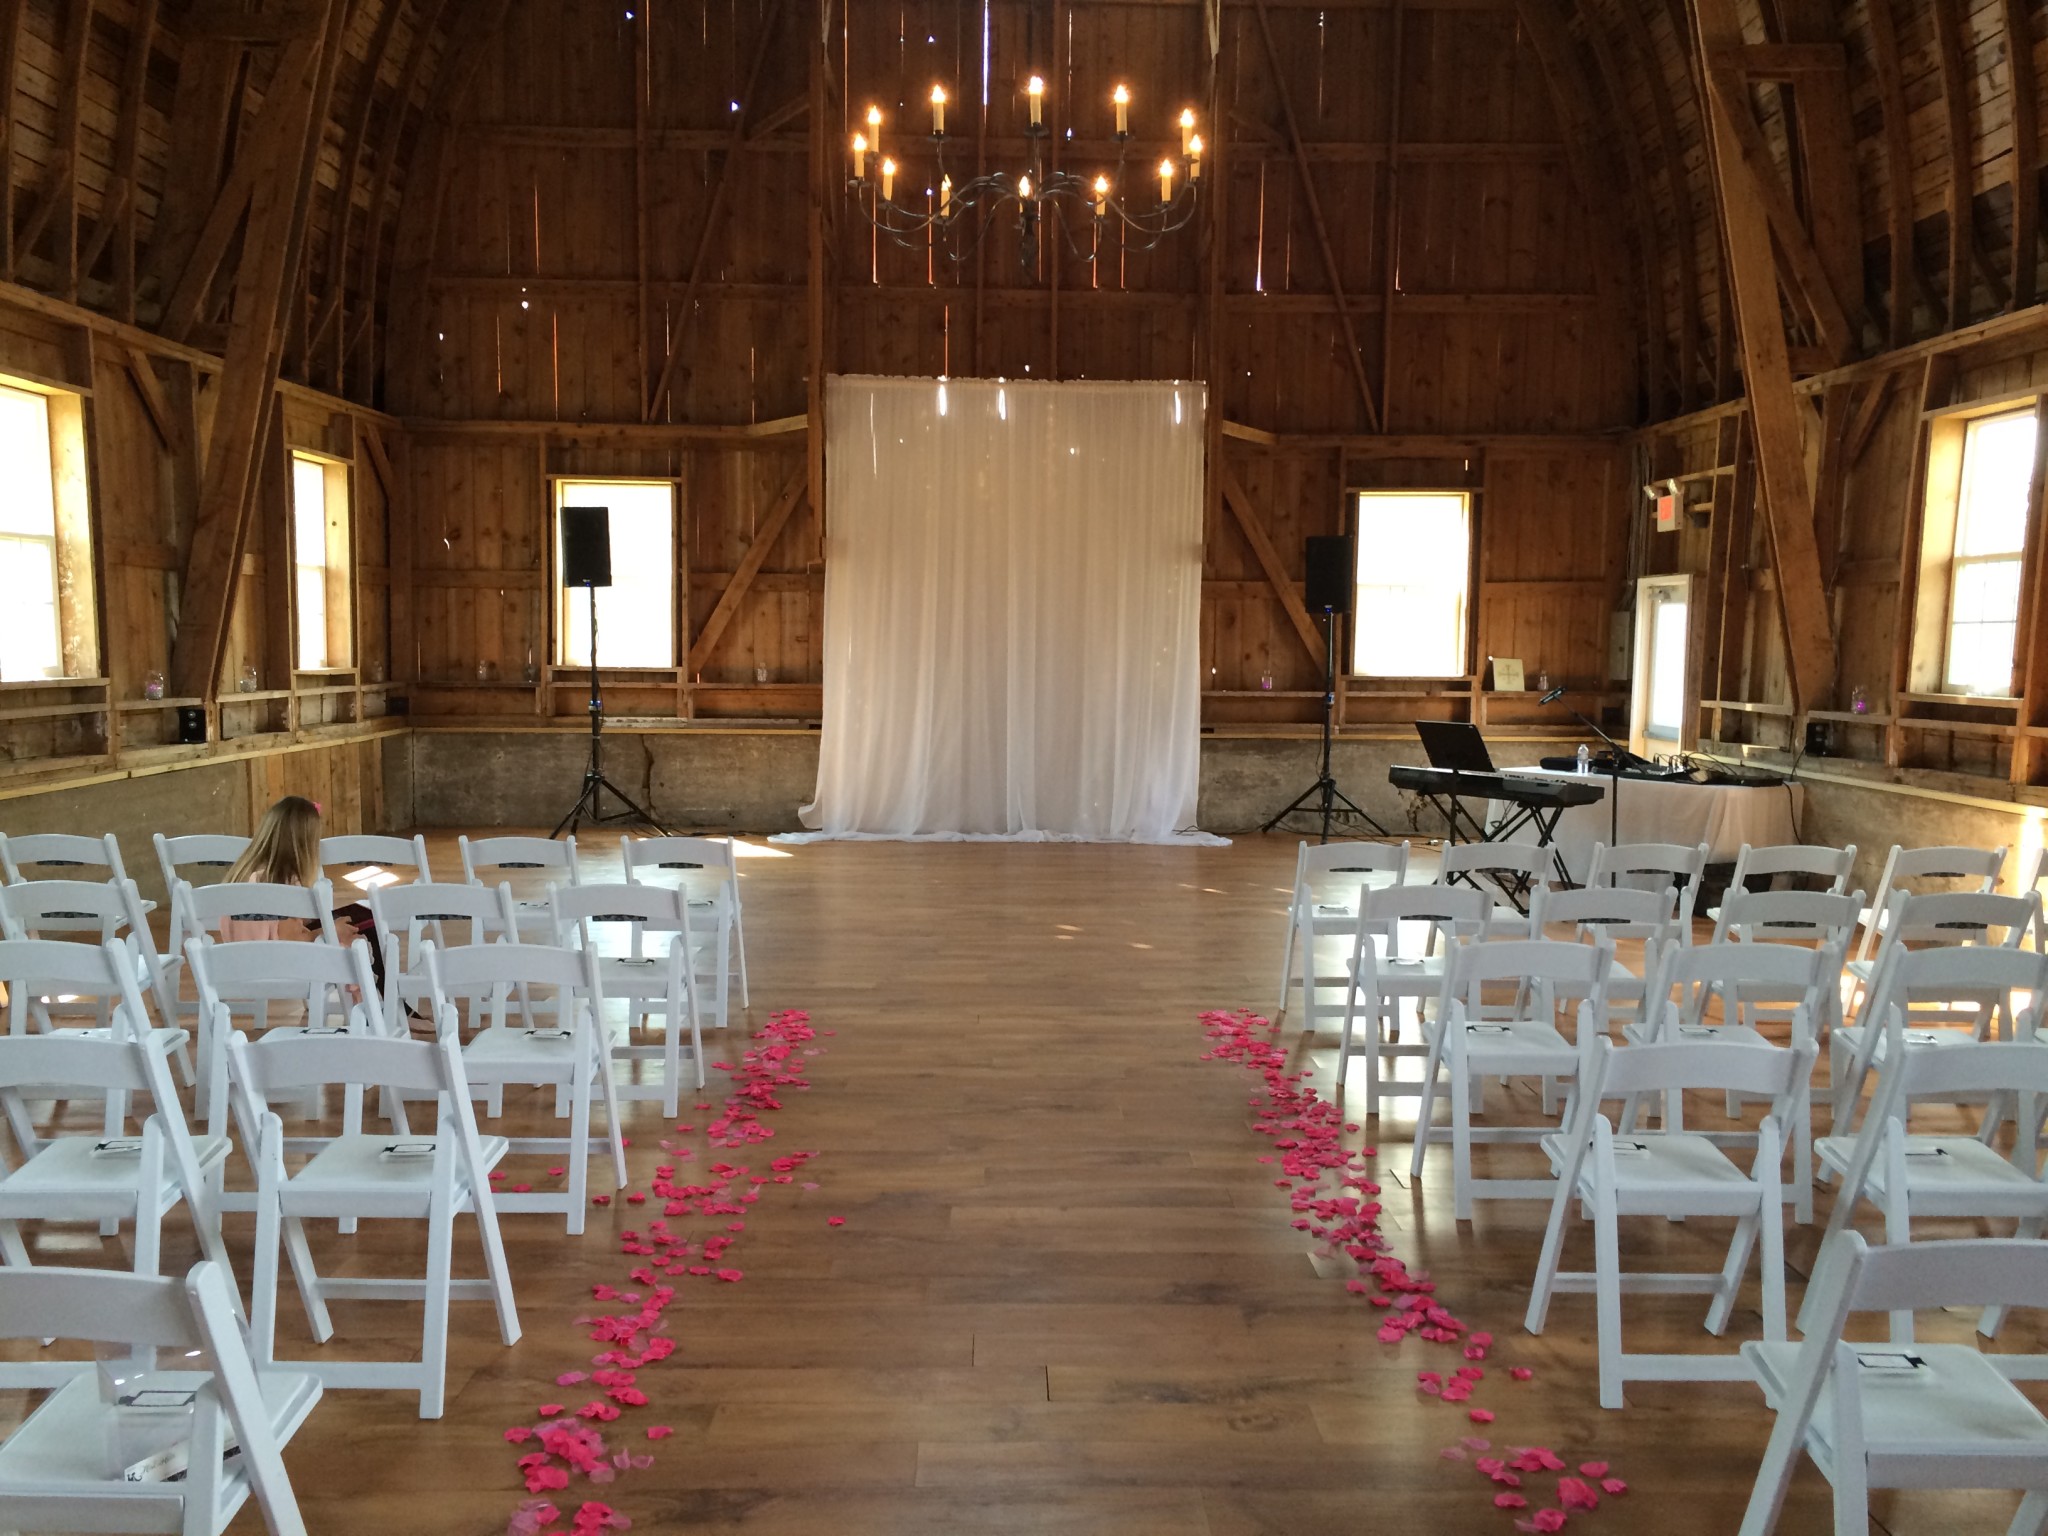 Ceremony Music Recommendations: Seating Music